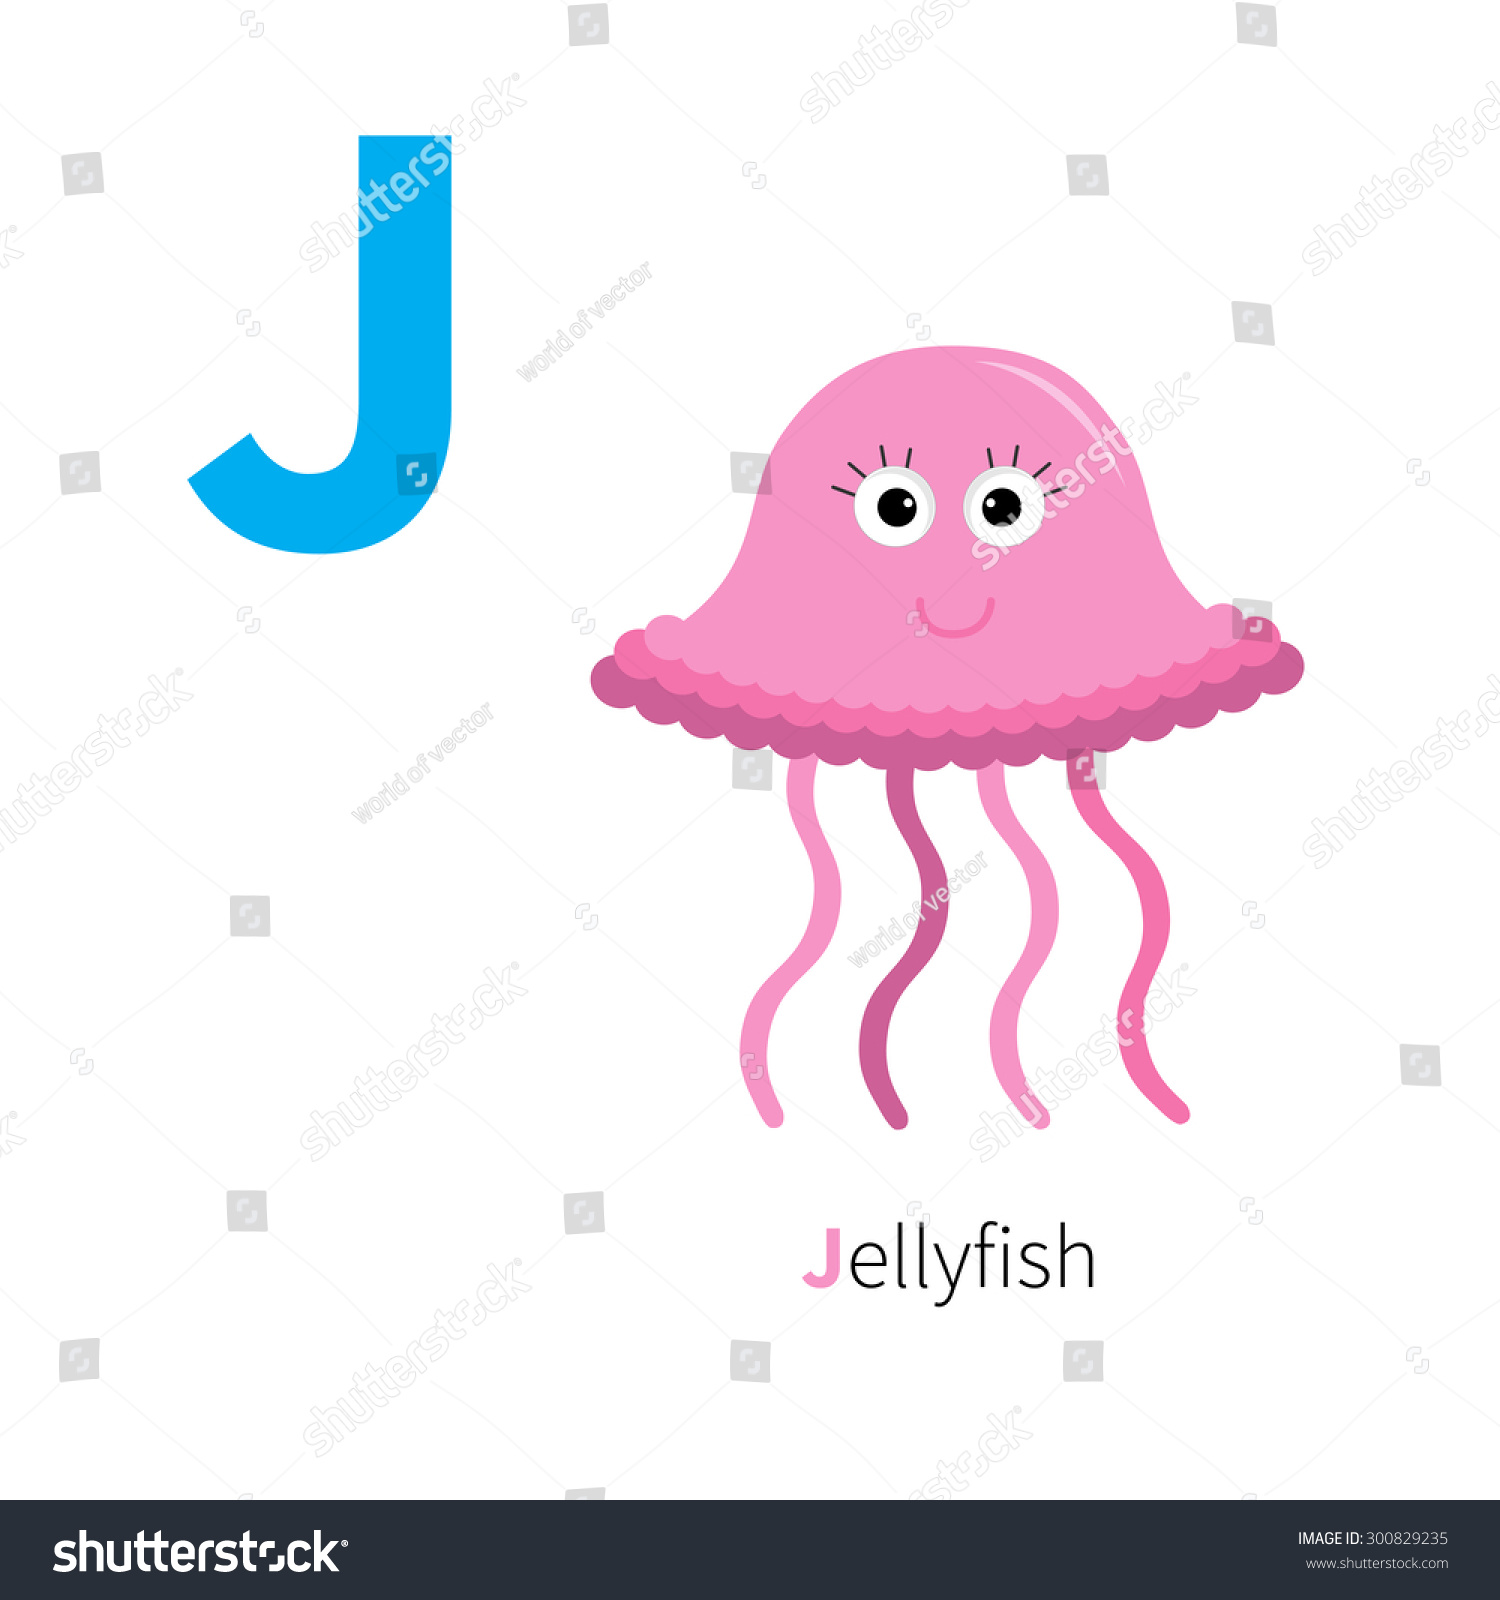 Letter J Jellyfish Letter Zoo Alphabet. English Abc With Animals ...